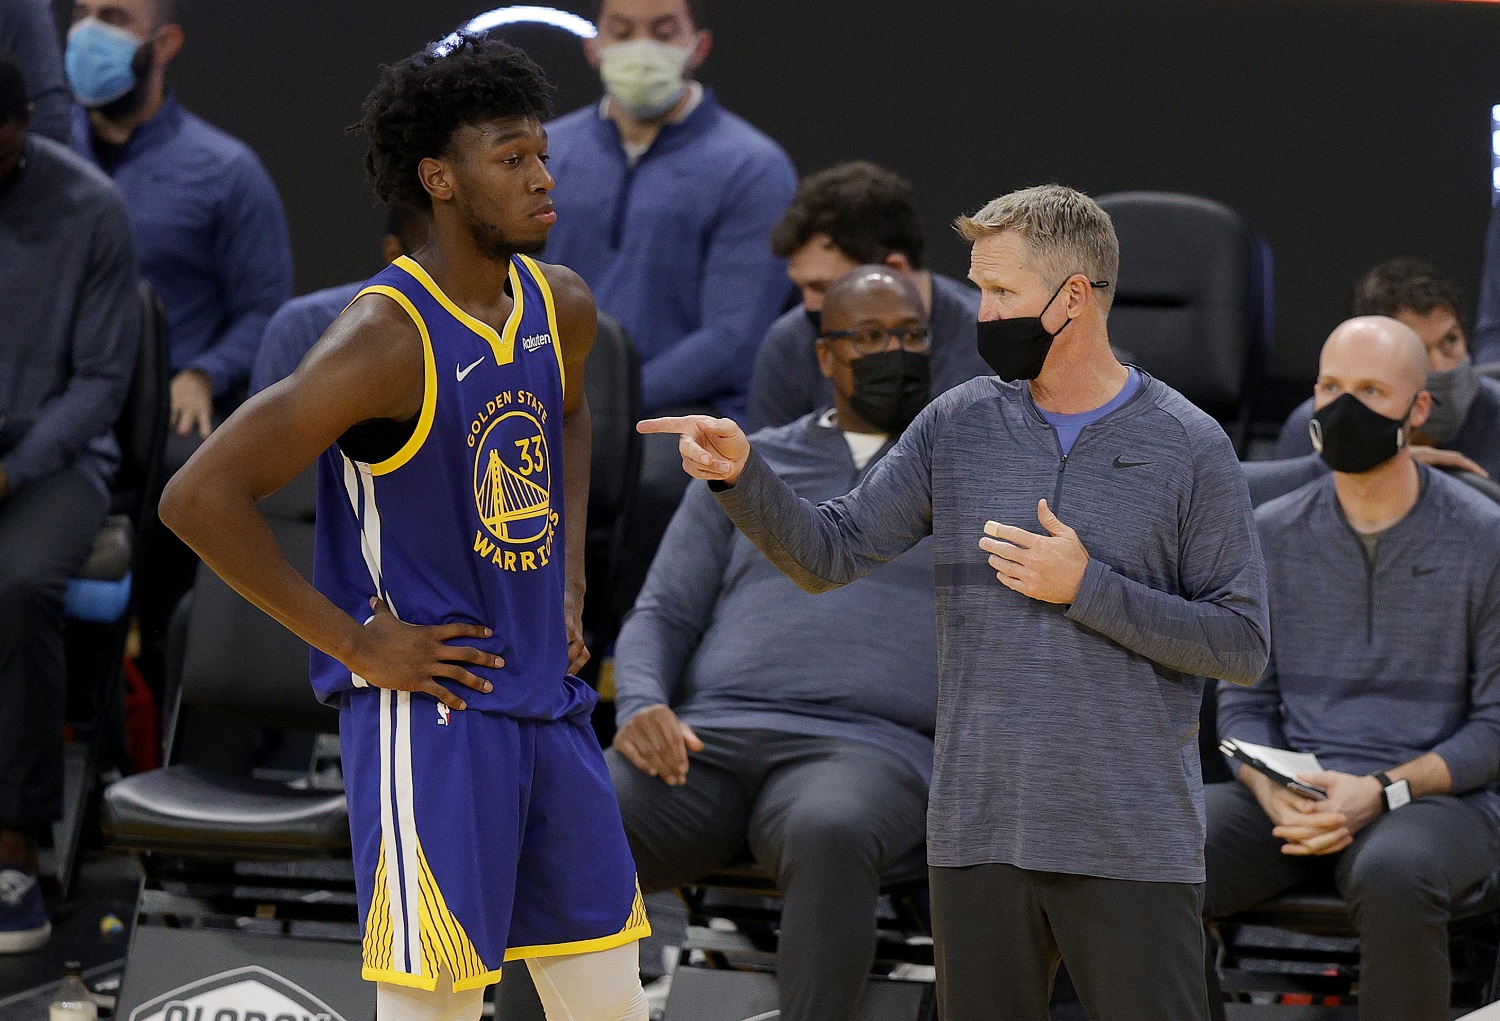 Coach Steve Kerr speaks to James Wiseman of the Golden State Warriors after he picked up a foul against the Indiana Pacers at Chase Center on Jan. 12, 2021, in San Francisco.